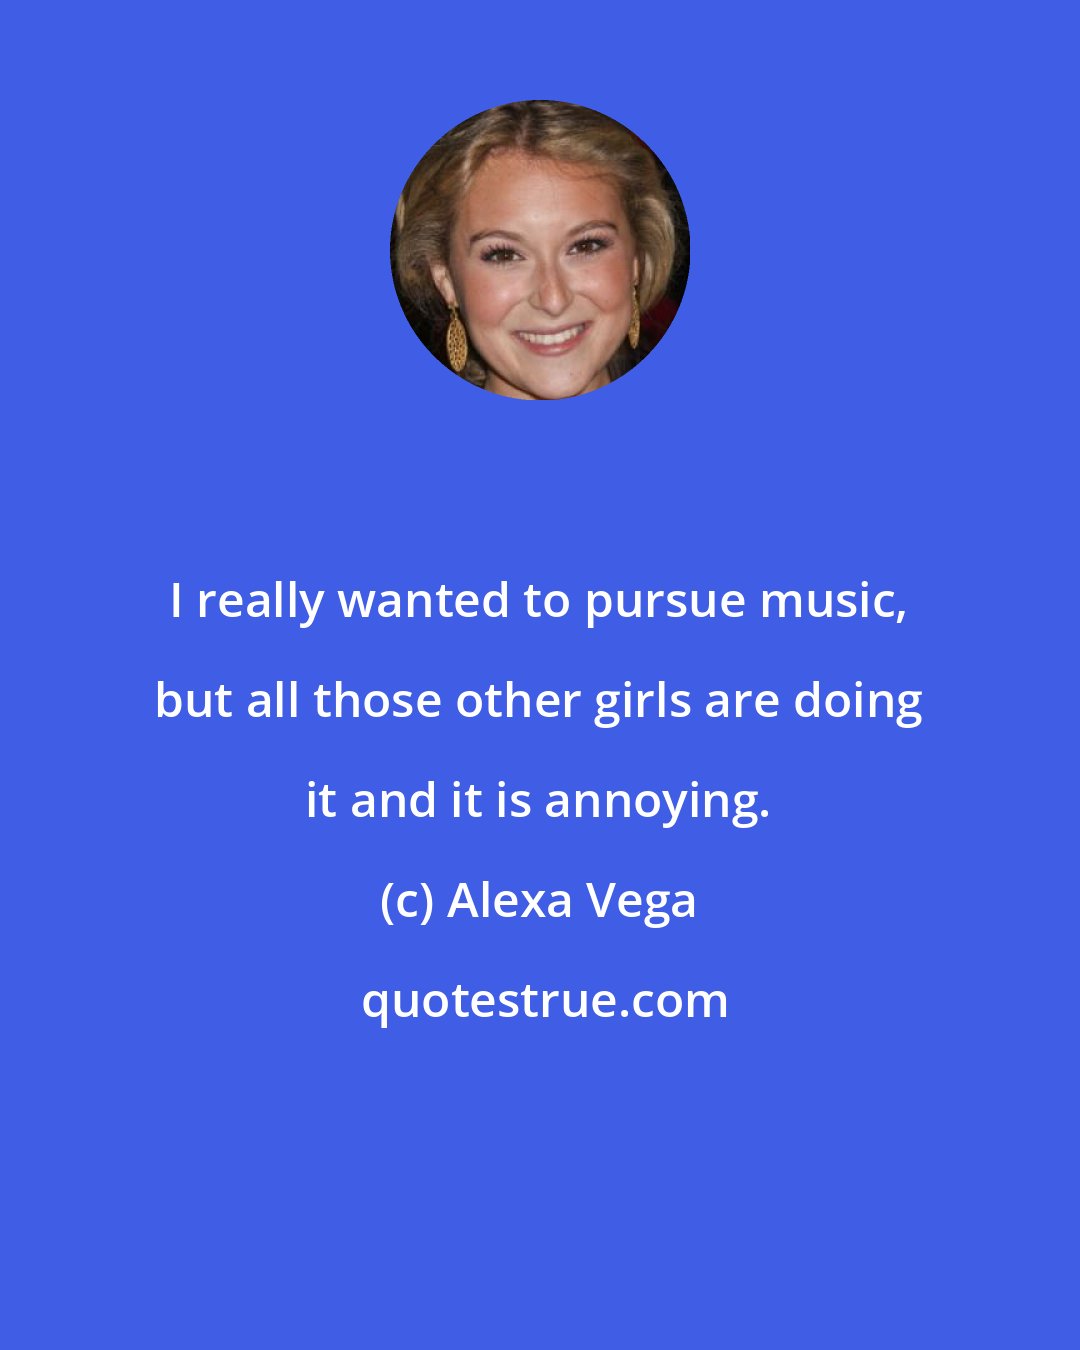 Alexa Vega: I really wanted to pursue music, but all those other girls are doing it and it is annoying.